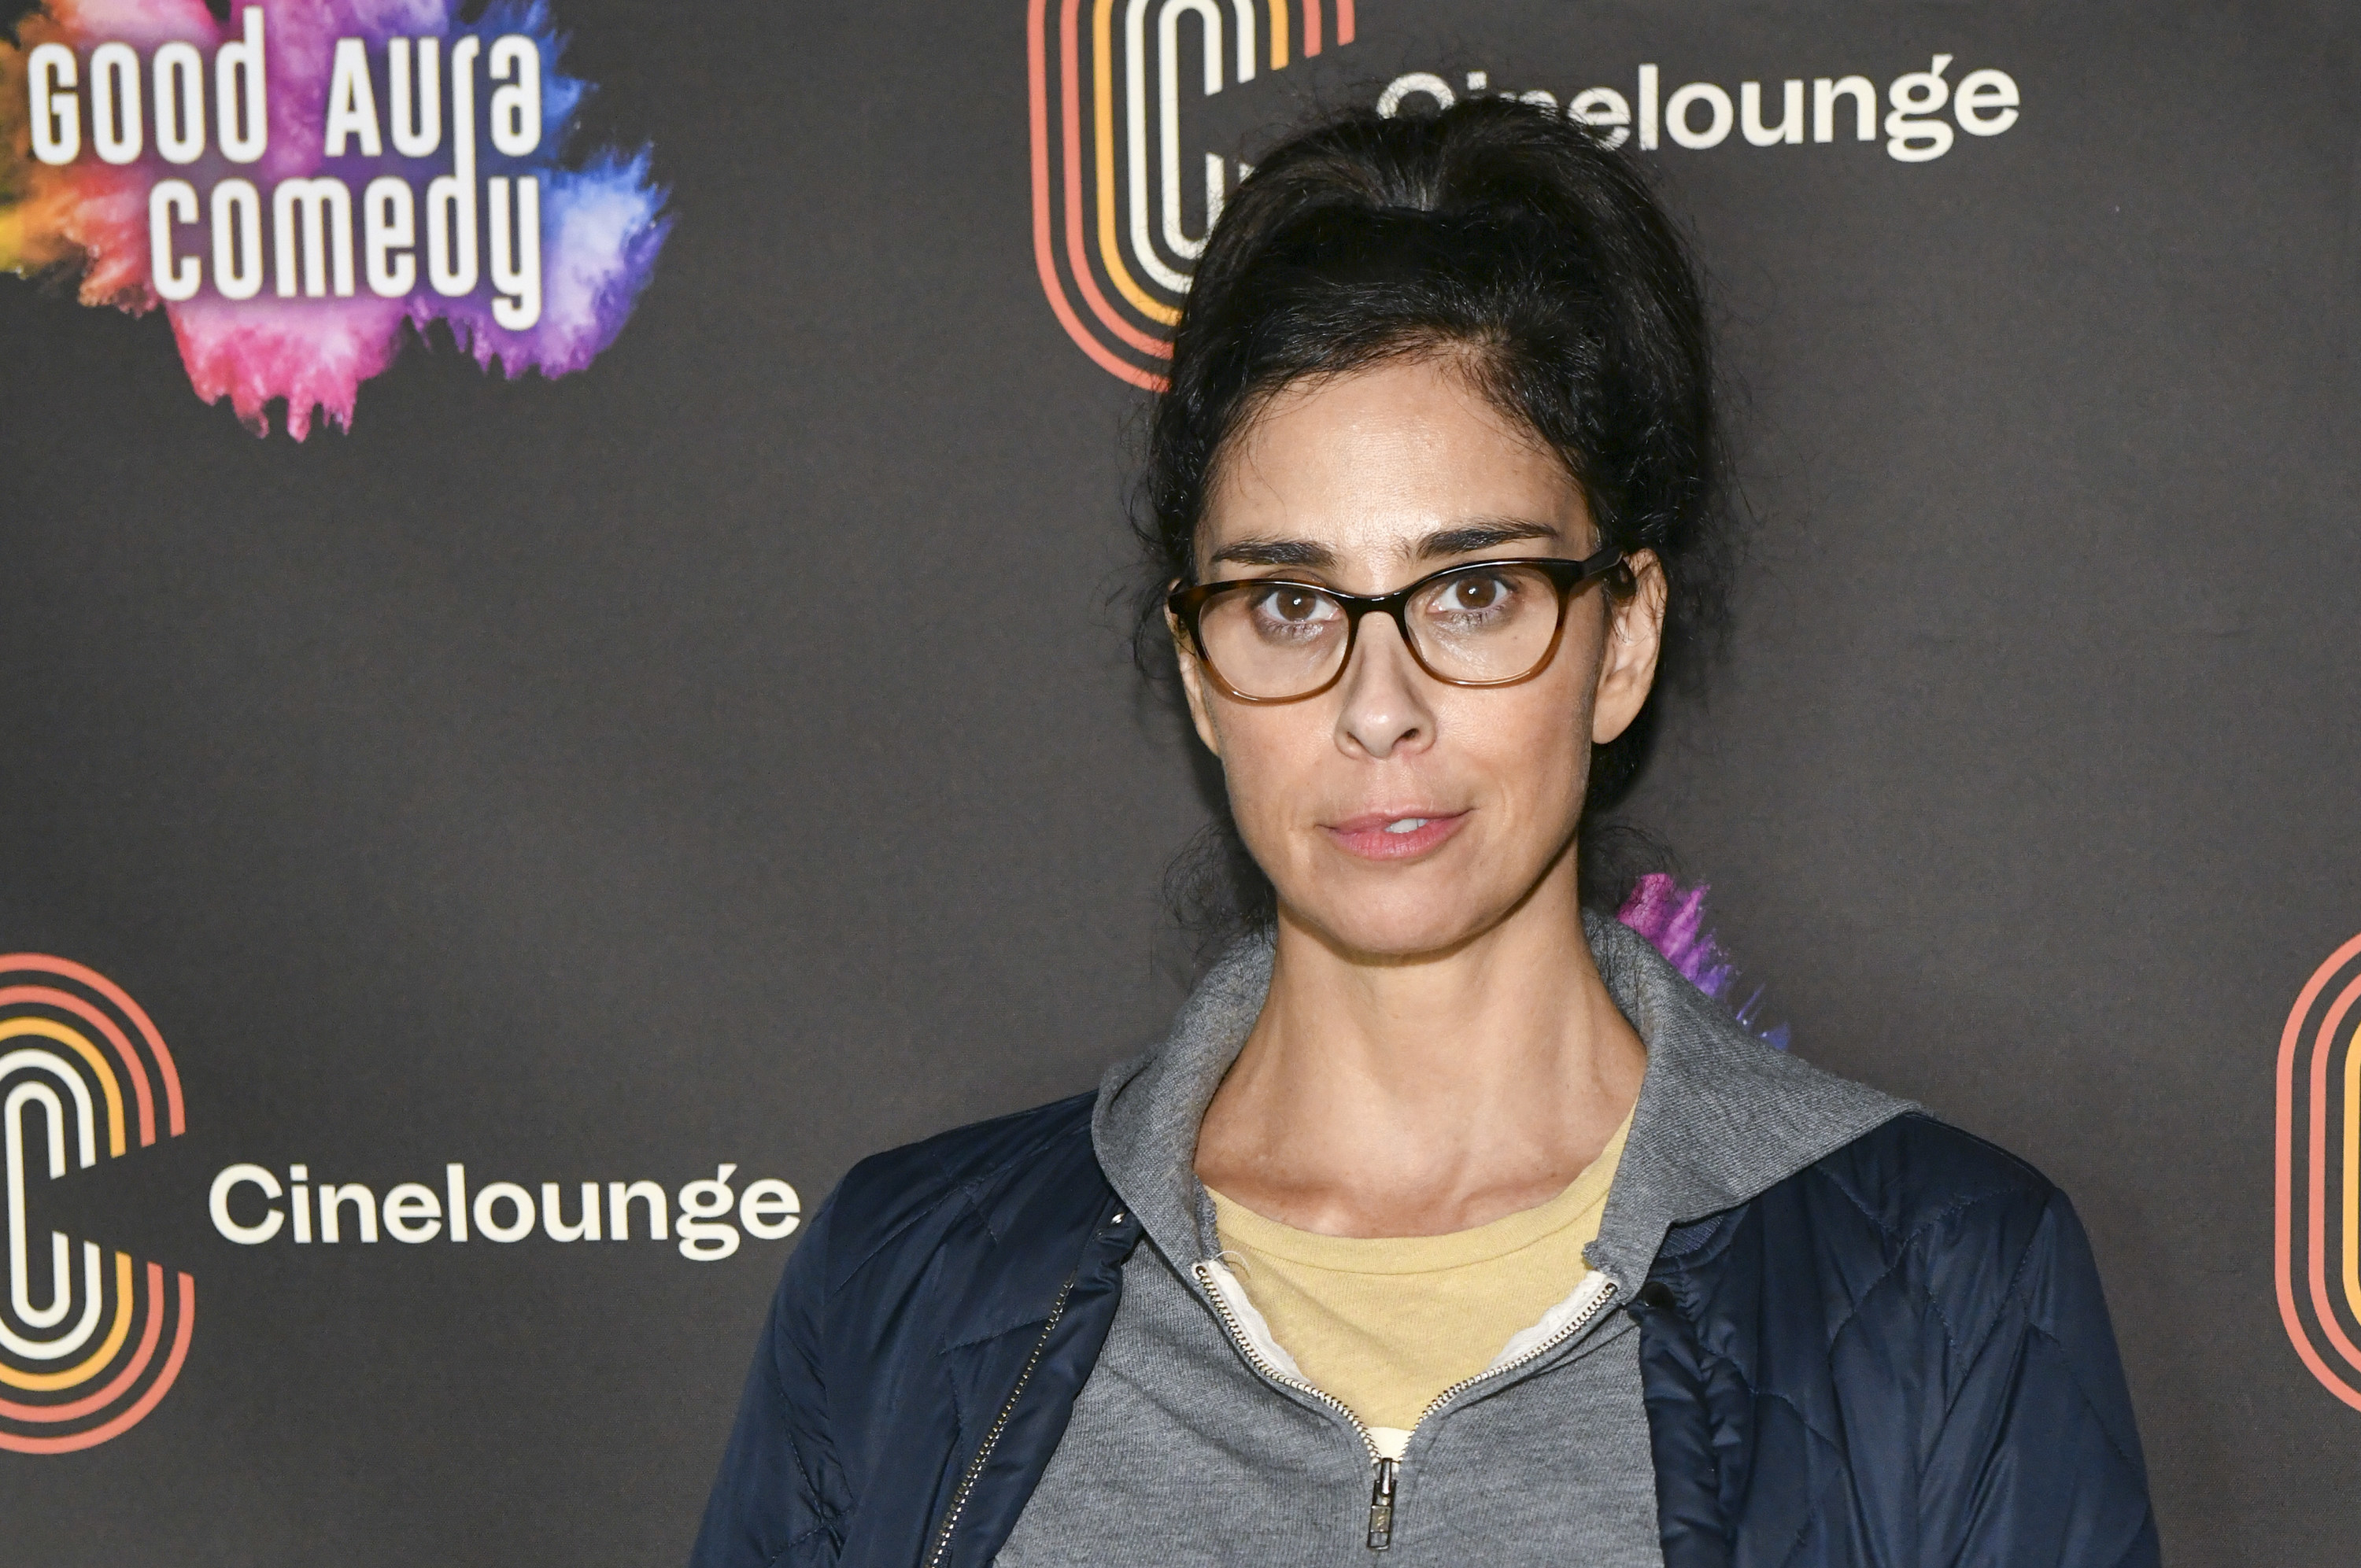 Sarah Silverman arrives at the Good Aura Comedy Show with Sarah Silverman at Cinelounge Outdoors on August 18, 2021 in Los Angeles, California